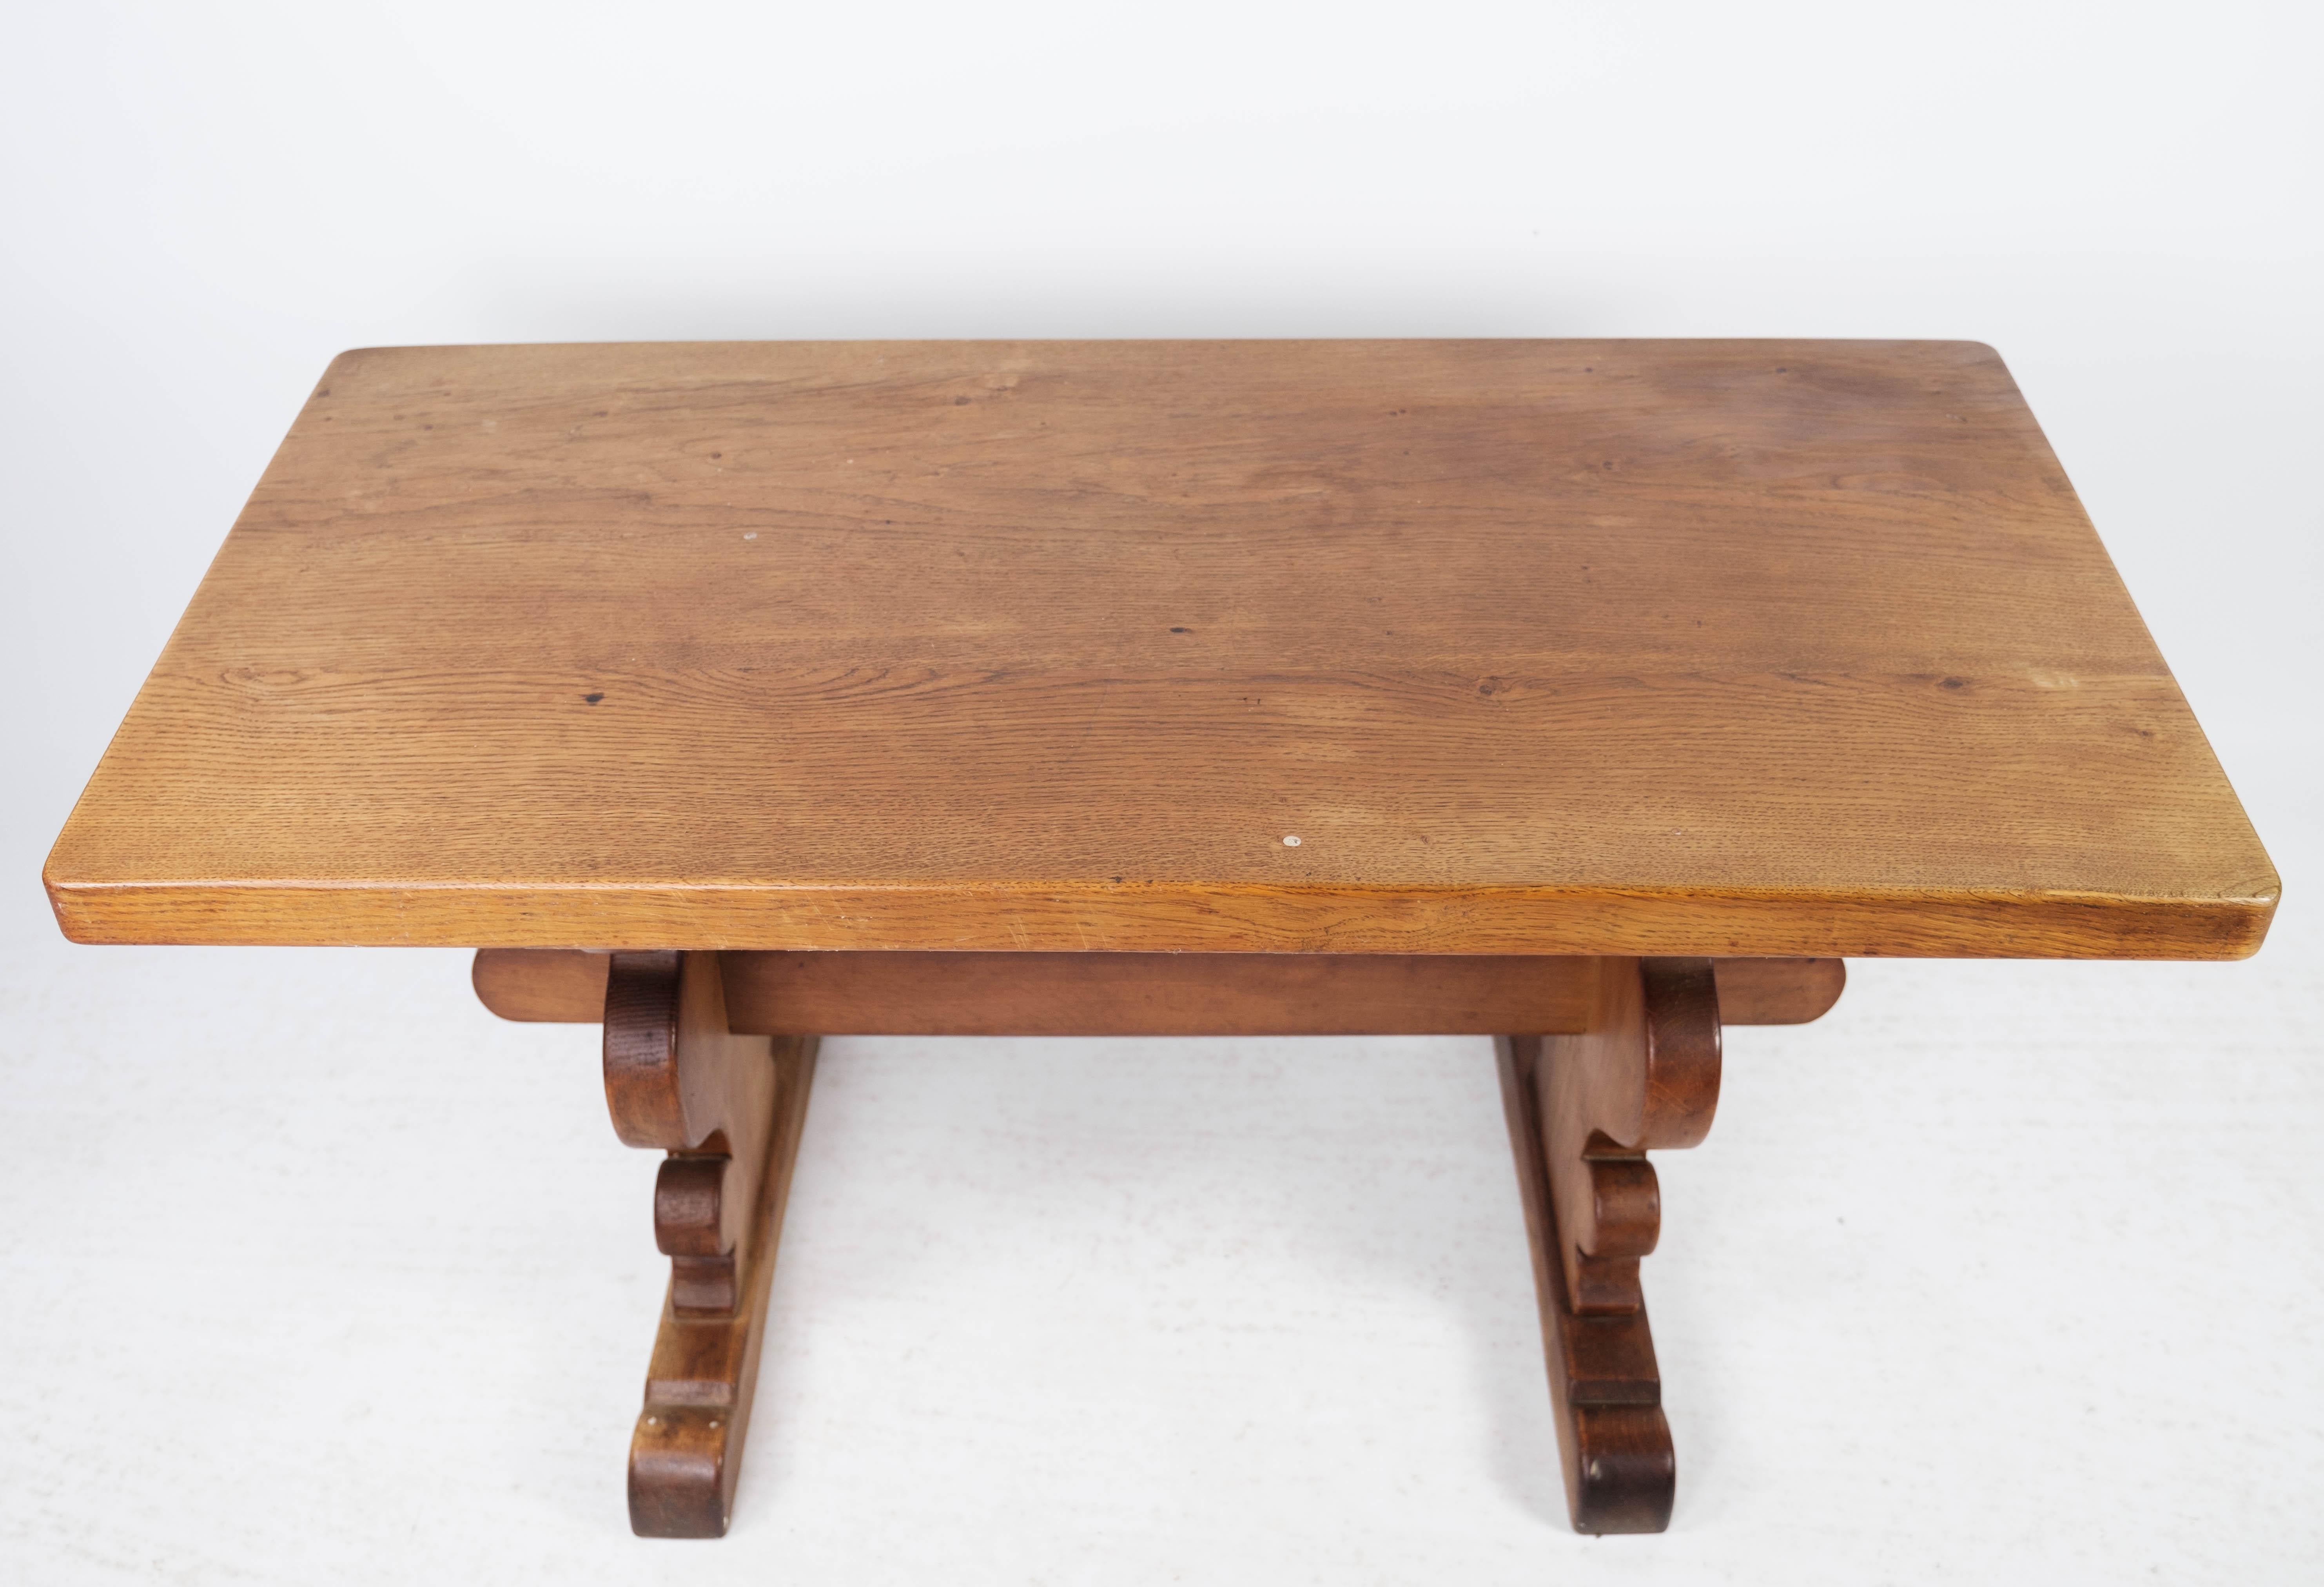 Other Coffee Table of Oak, and in Great Vintage Condition from the 1970s